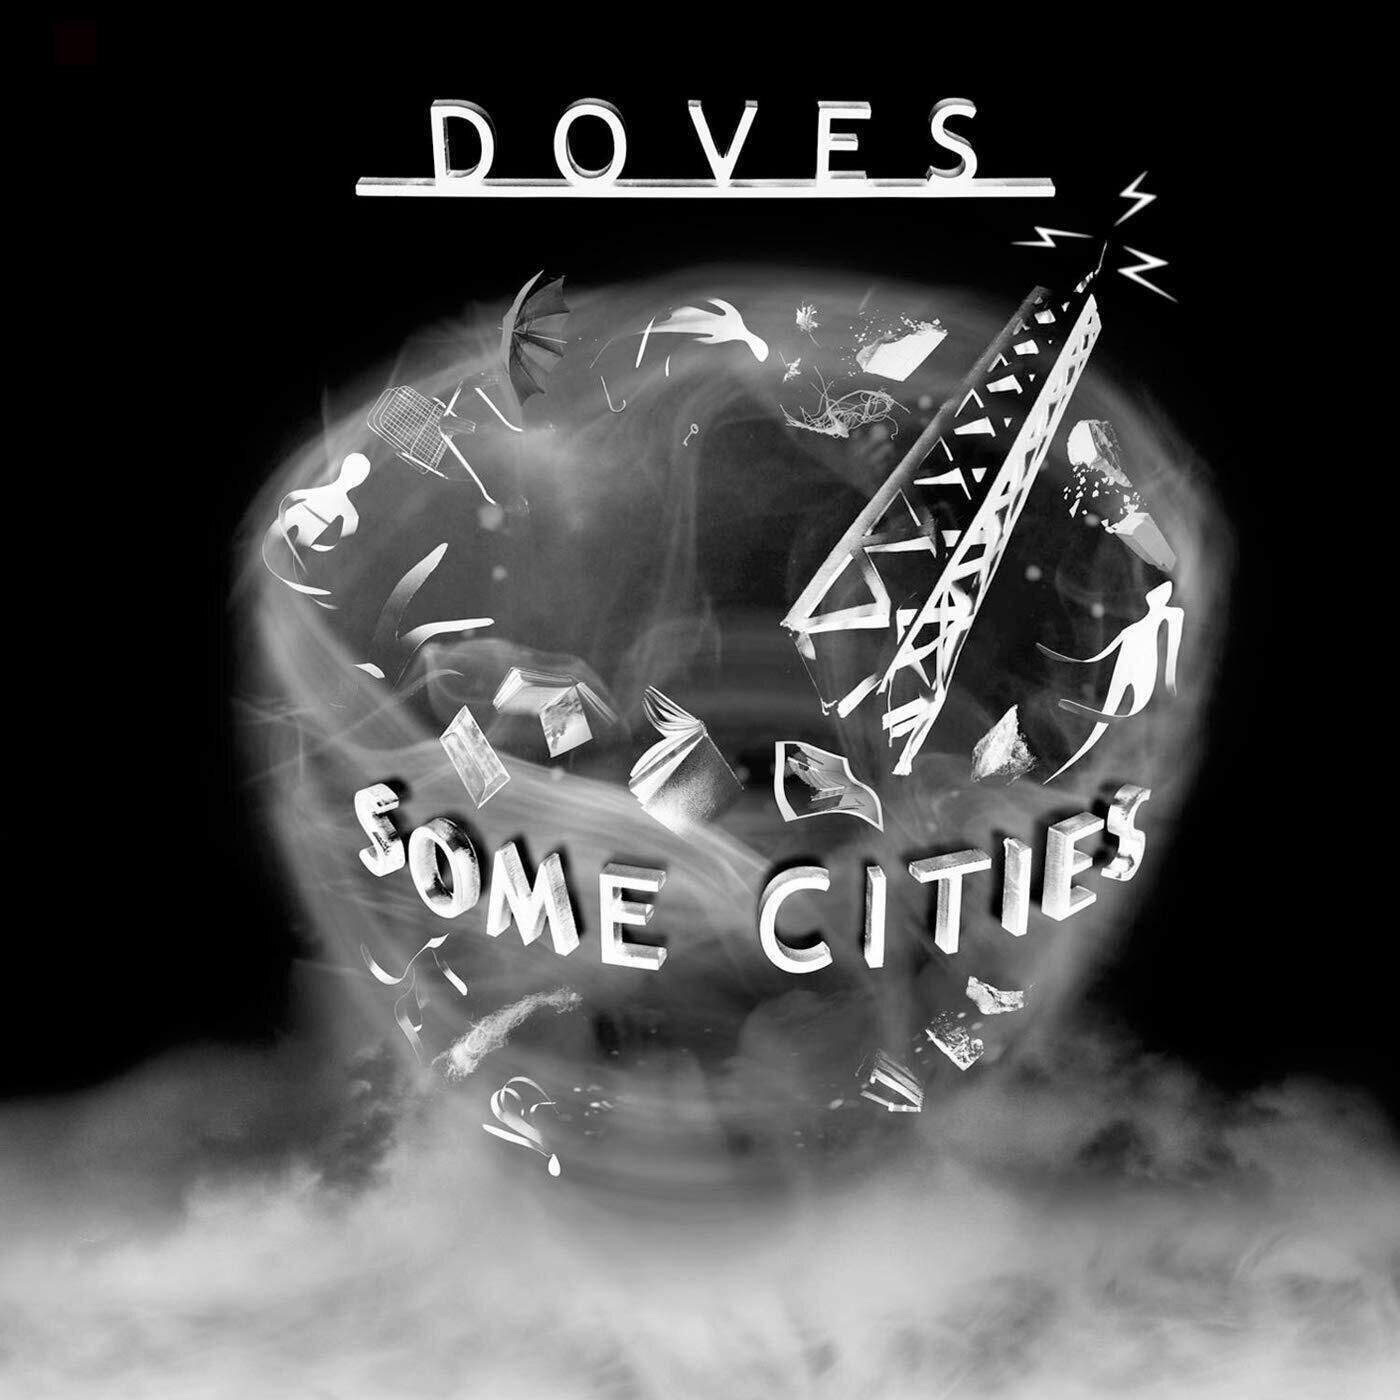 Vinyl Record Doves - Some Cities (White Coloured) (Limited Edition) (2 LP)